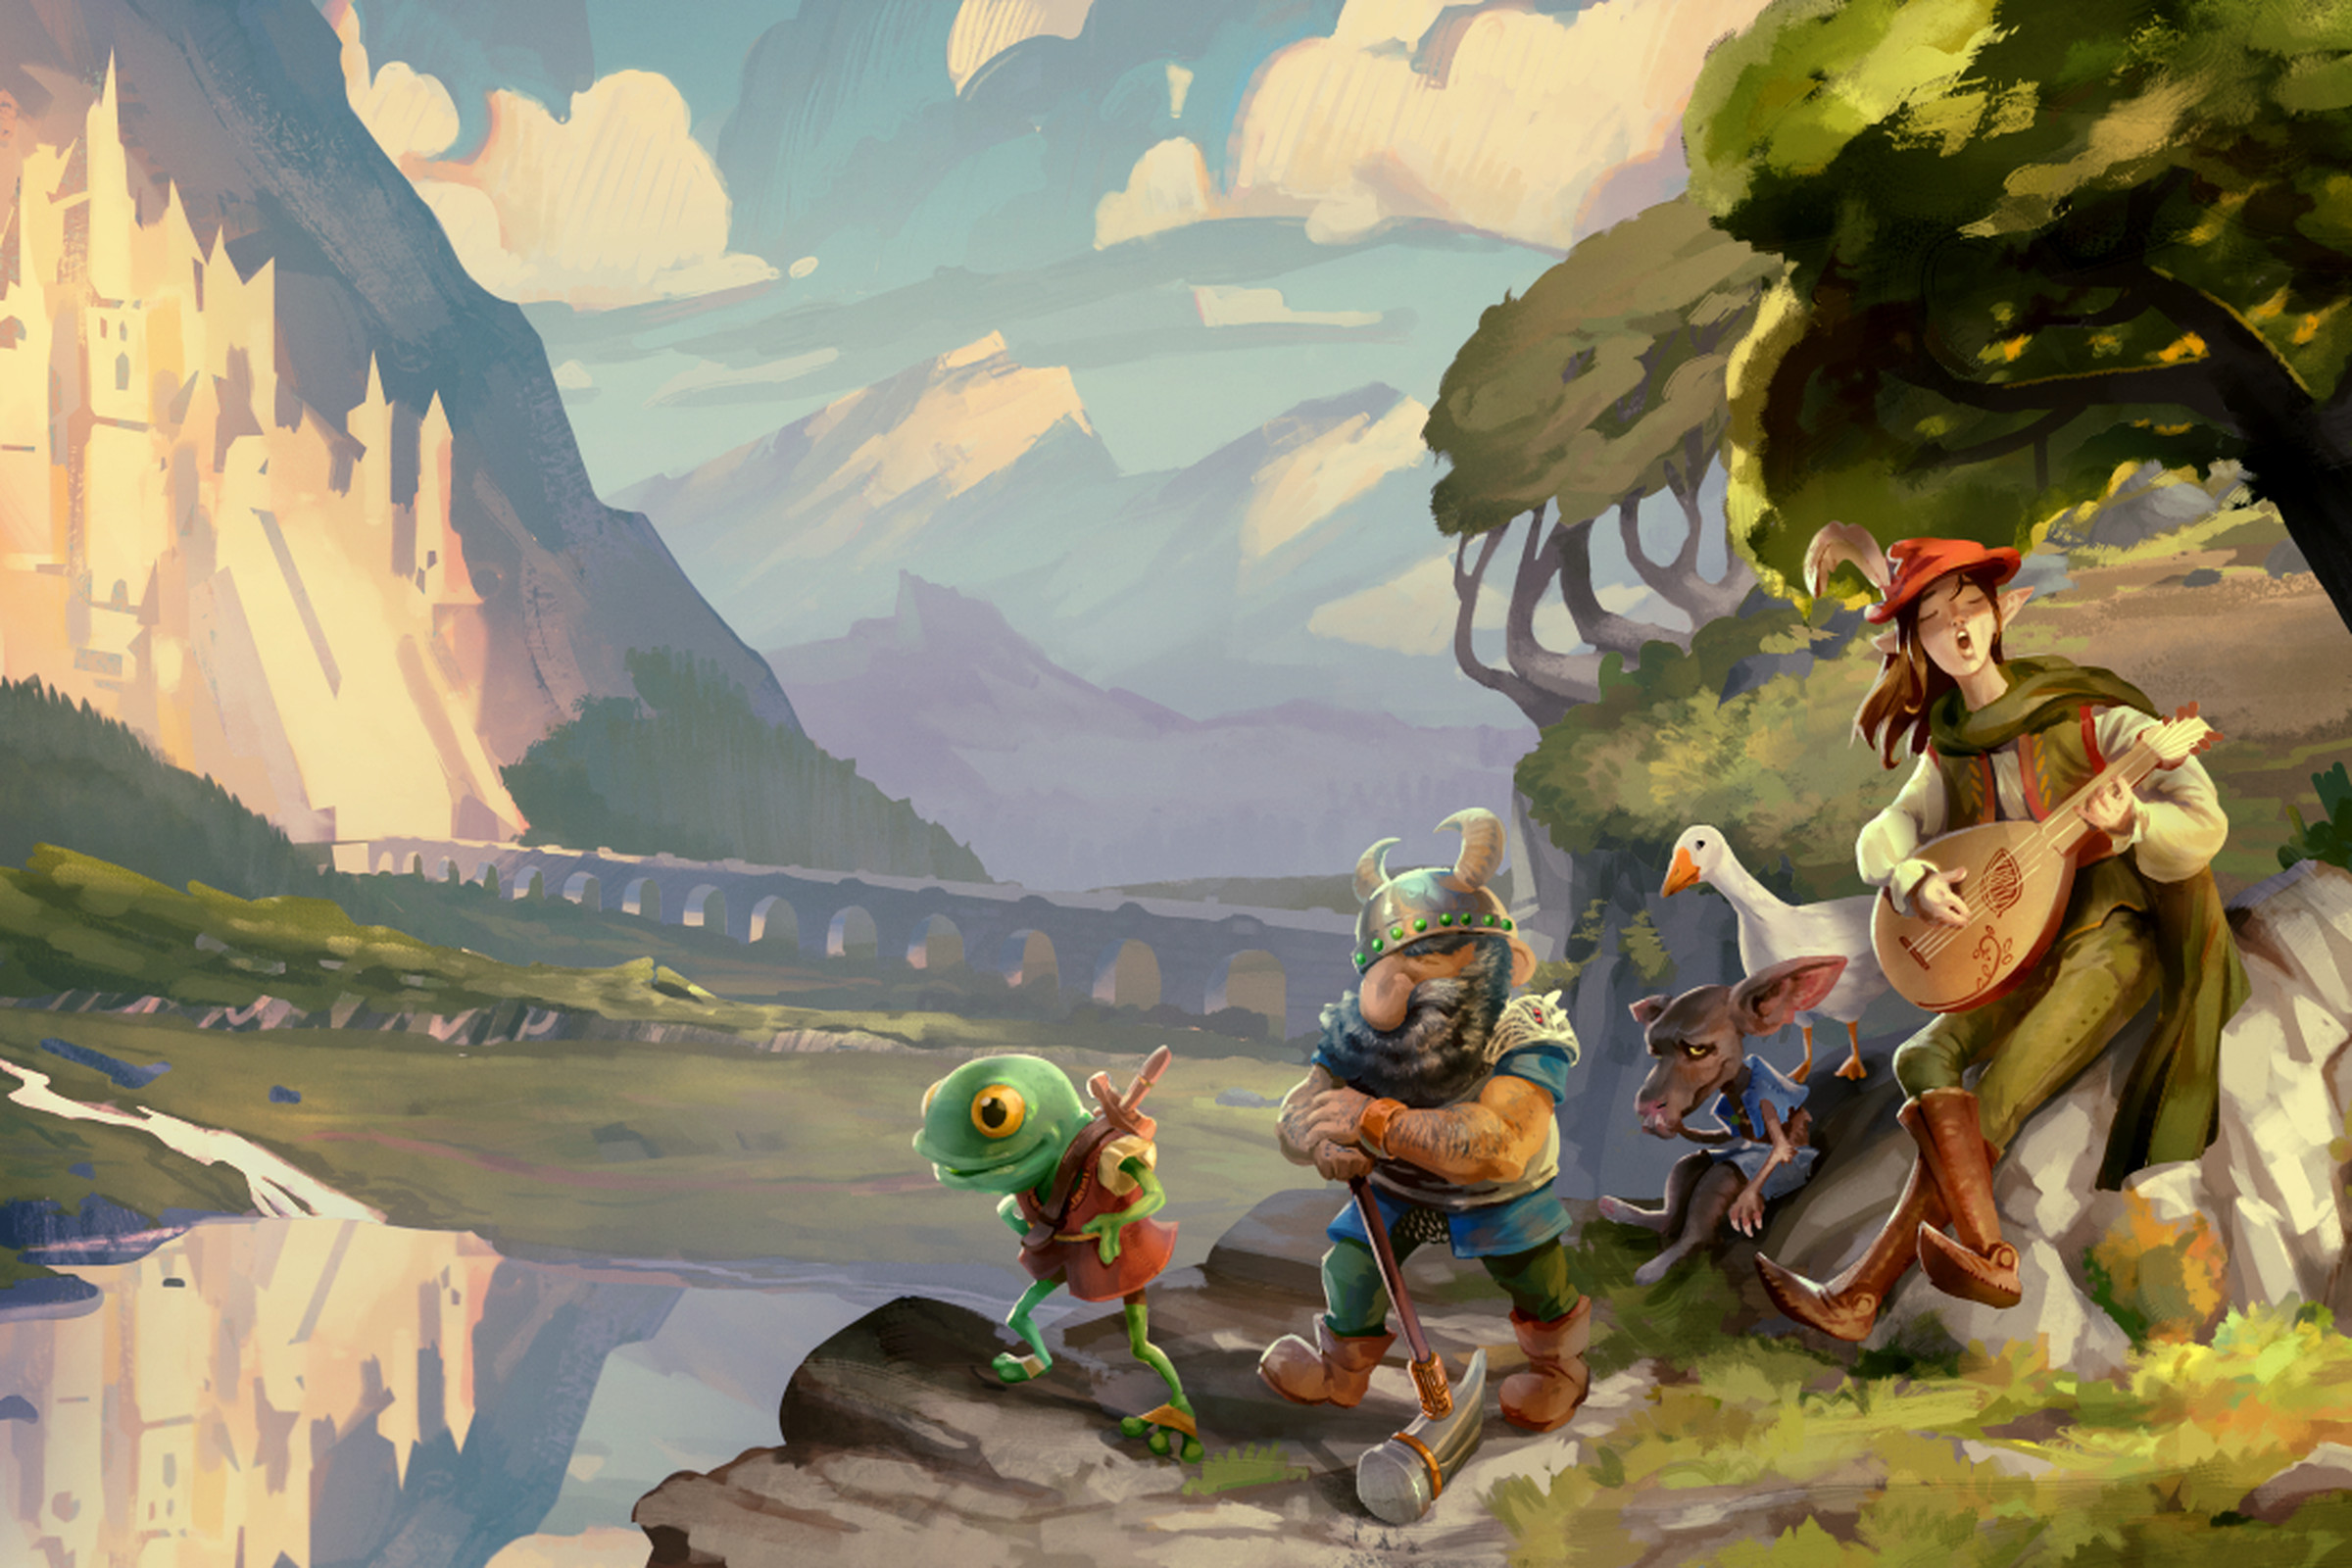 Key art for Dwarf Fortress’ Adventure Mode, featuring an adventuring party of a dwarf, an elf, a goblin, and a frog.